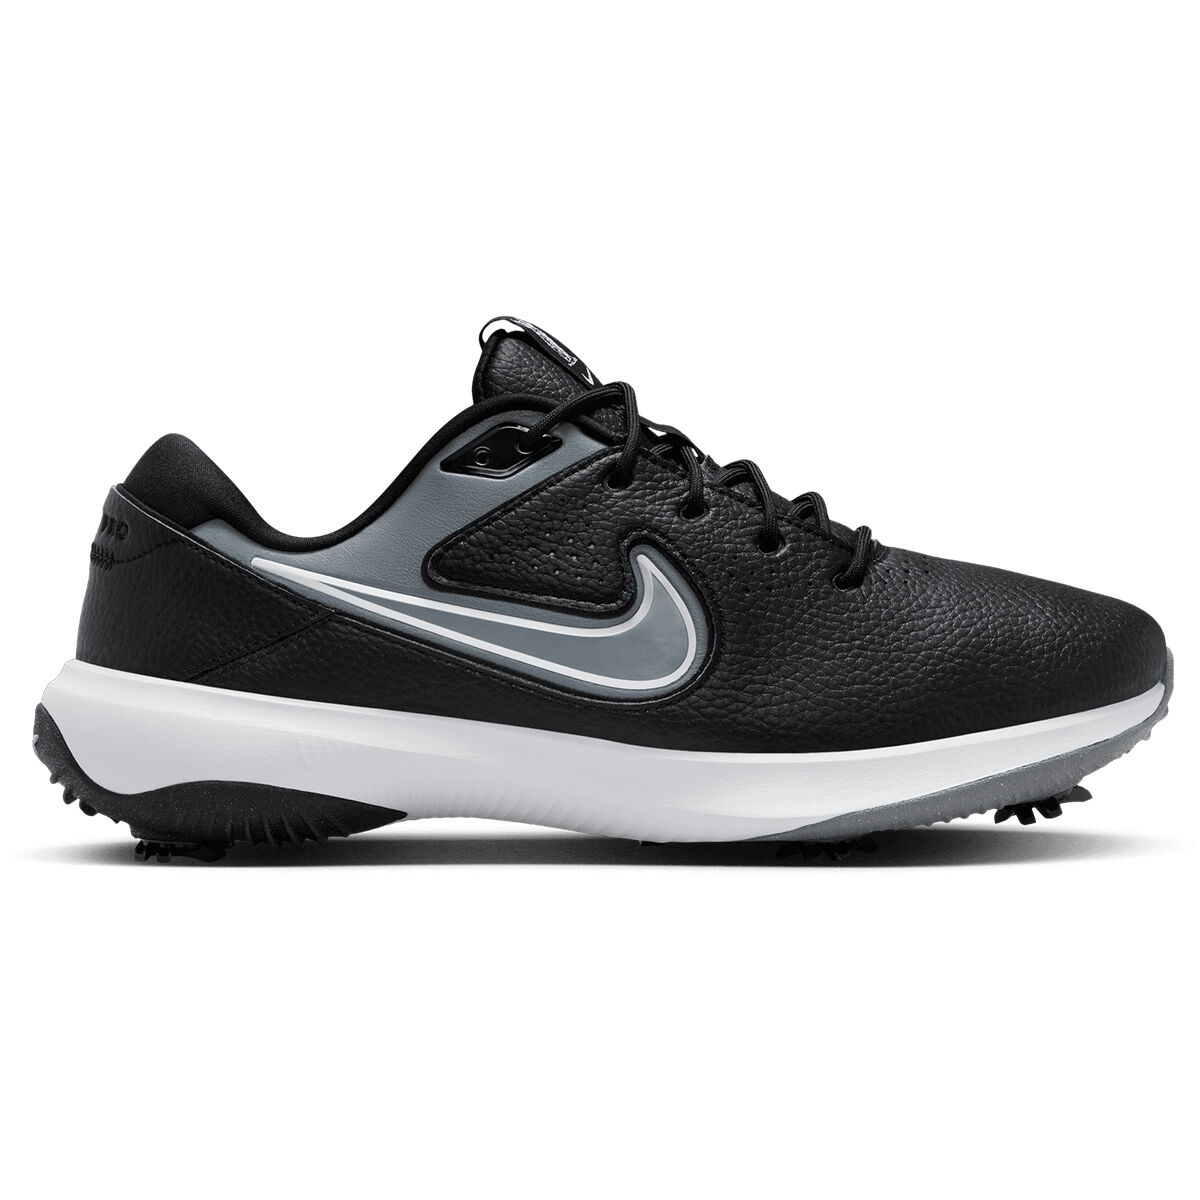 Nike Men’s Victory Pro 3 Waterproof Spiked Golf Shoes, Mens, Black/white/cool grey, 7 | American Golf